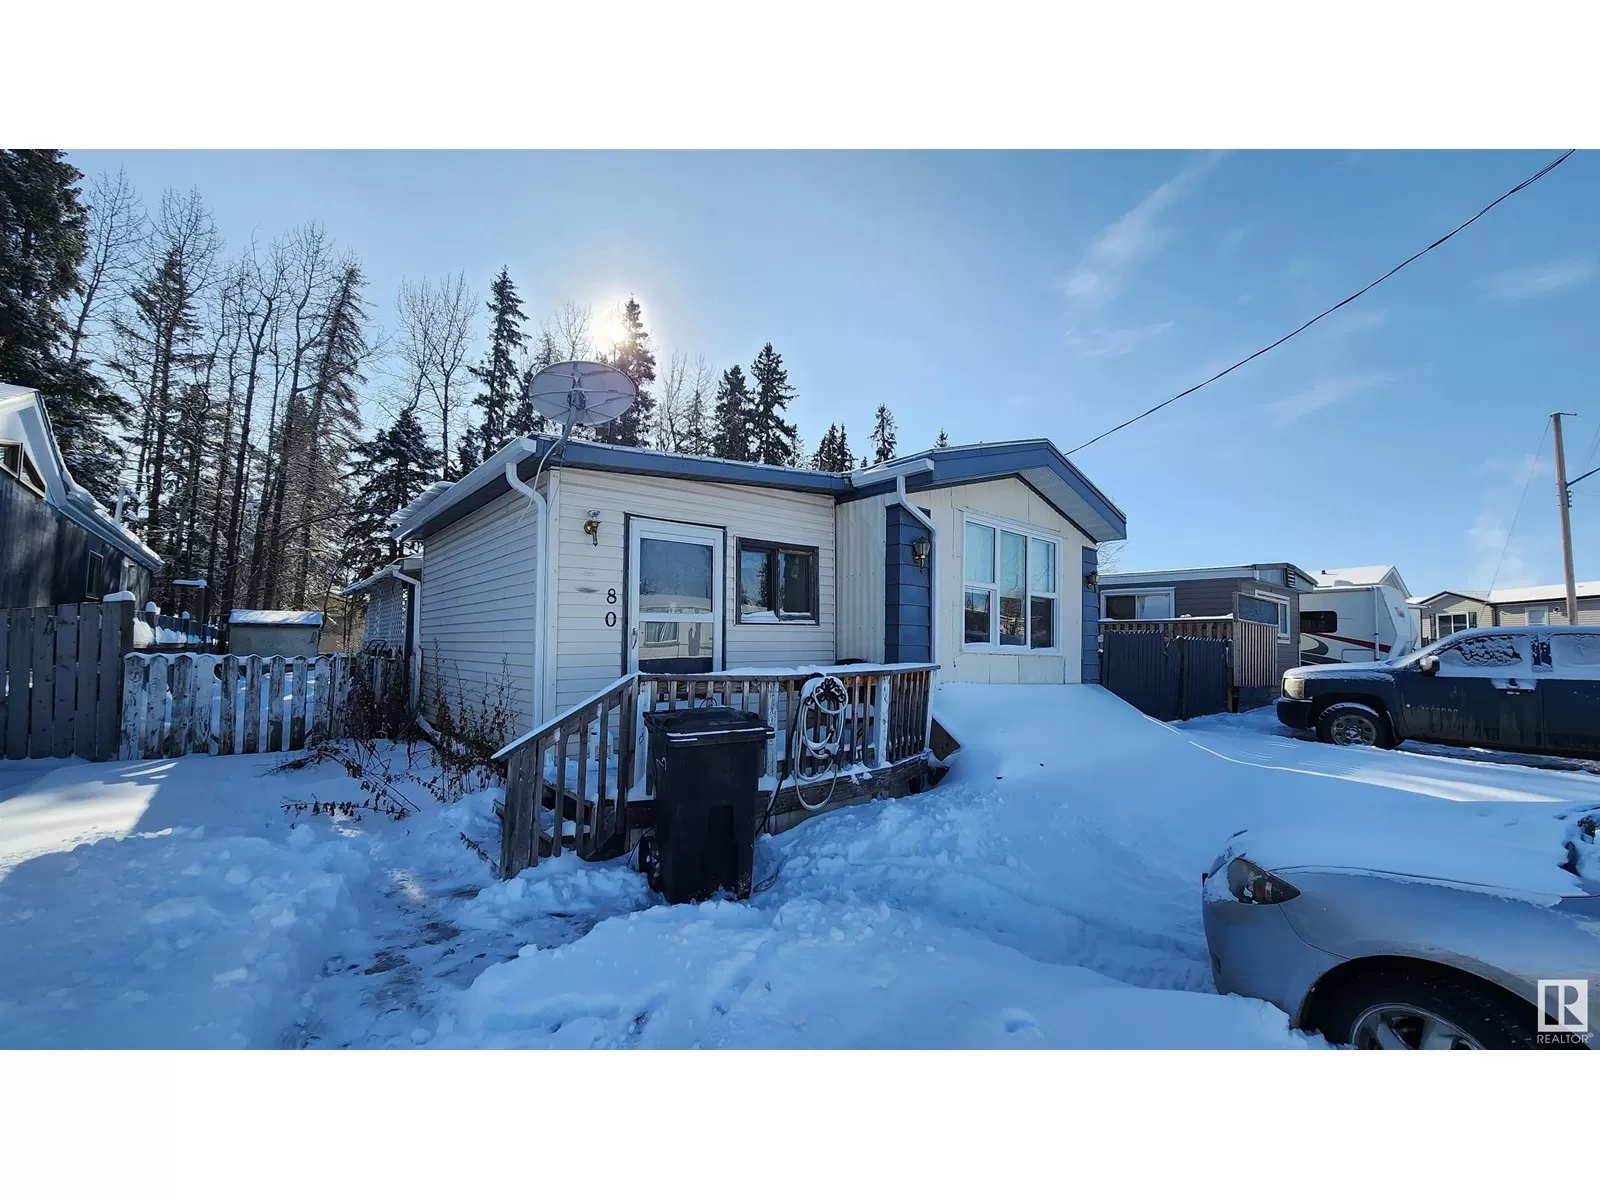 Mobile Home for rent: #80 5644 50 Street (greenwood M.h.p.), Drayton Valley, Alberta T7A 1L4